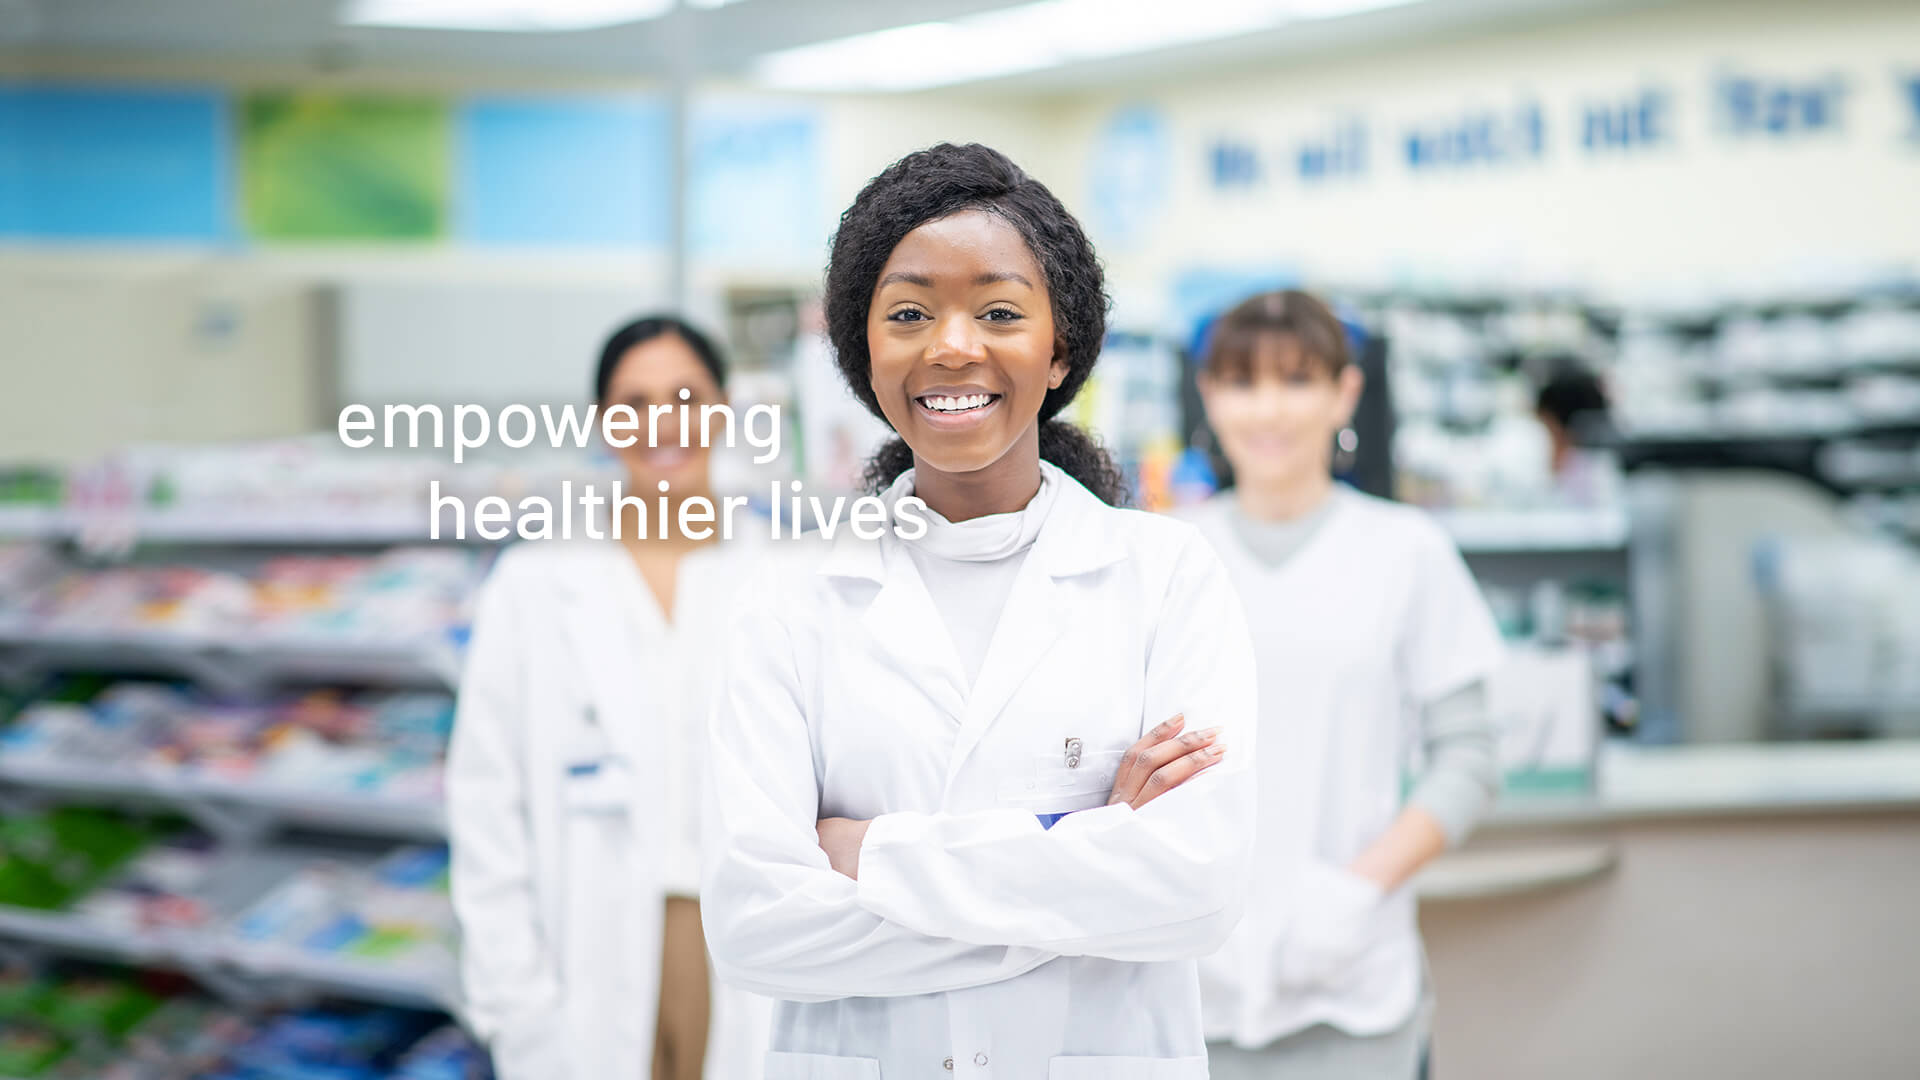 Empowering healthier lives